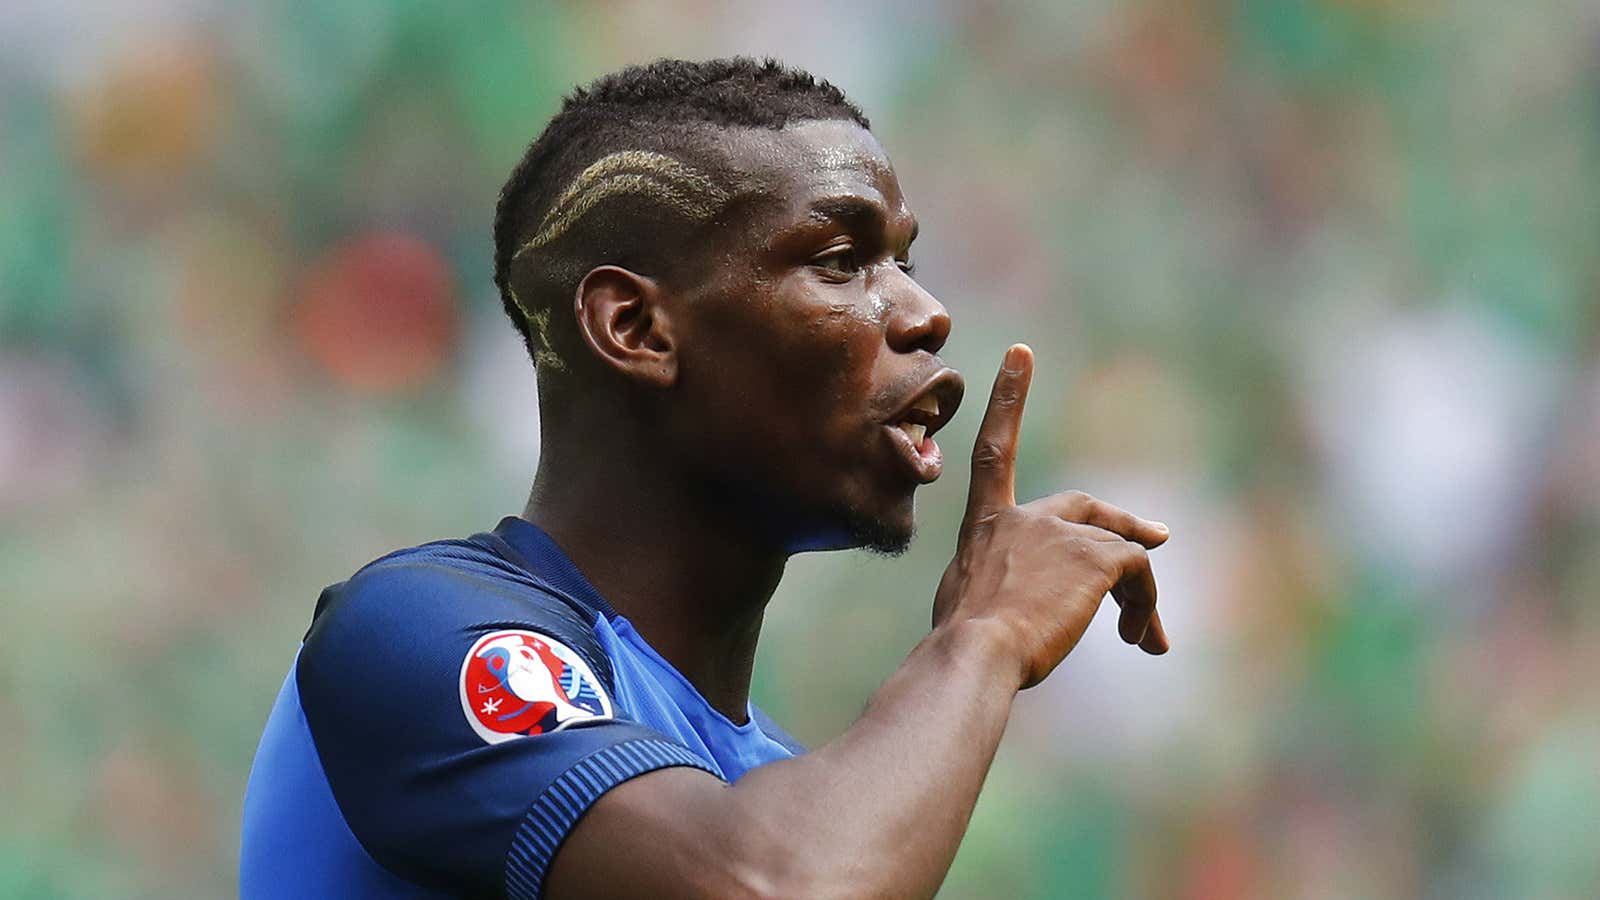 Pogba has become soccer’s most expensive star.